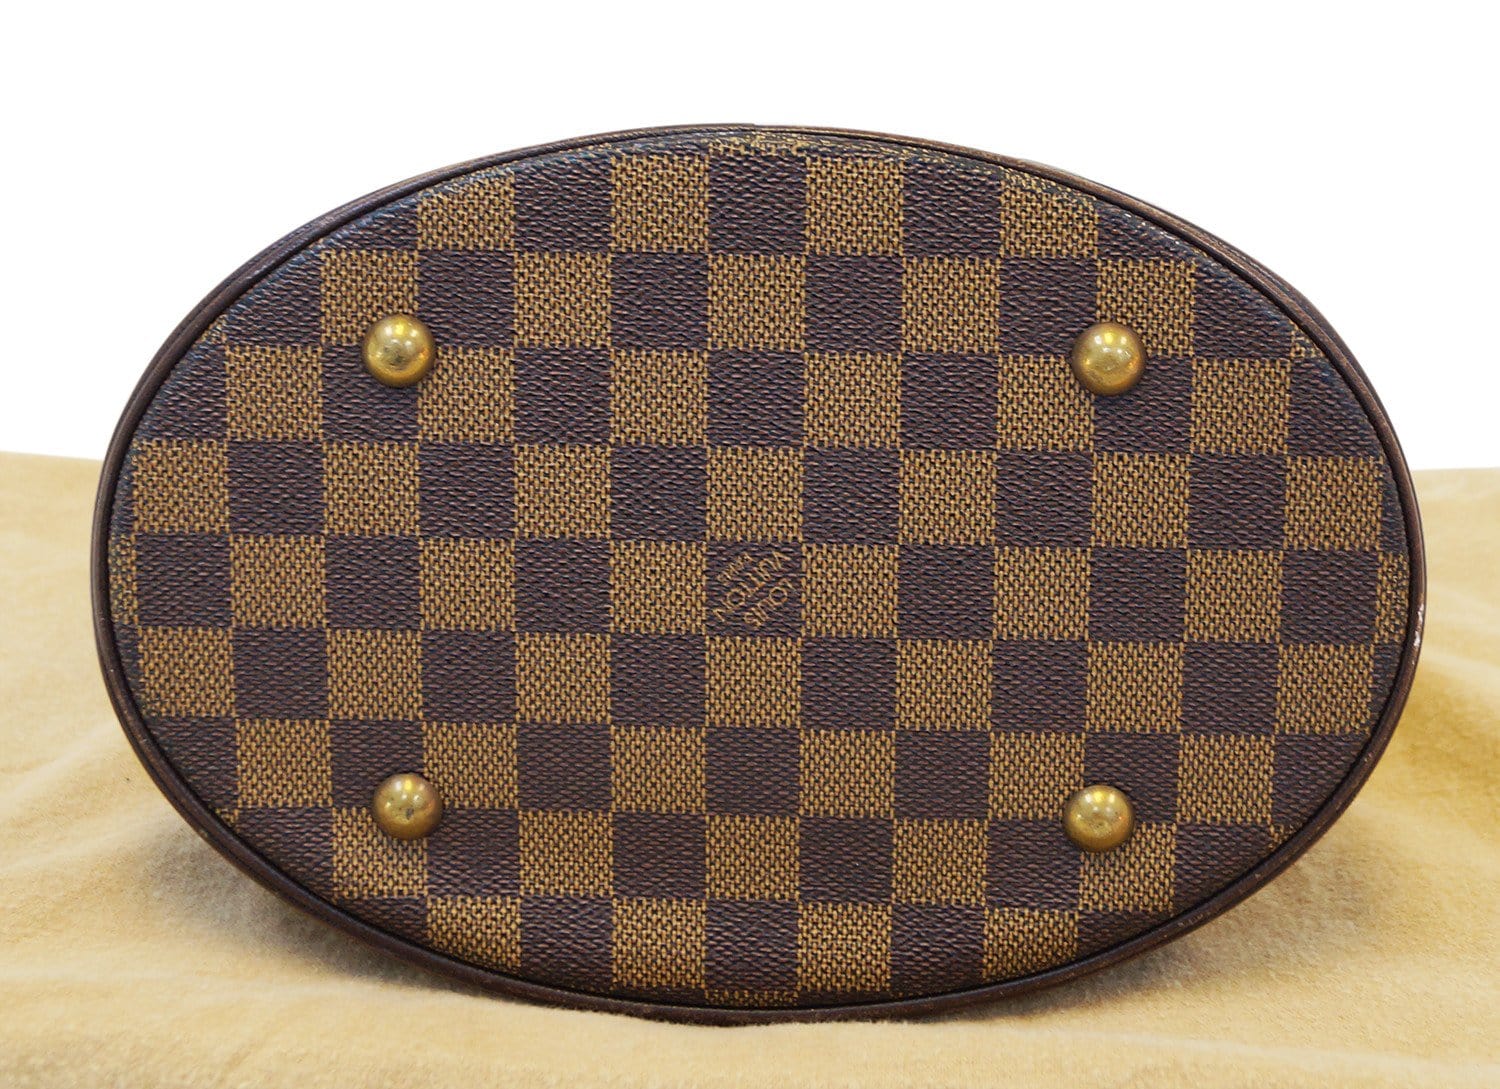 Auth Louis Vuitton Damier Pouch for Marais Bag Small Pouch Brown Used